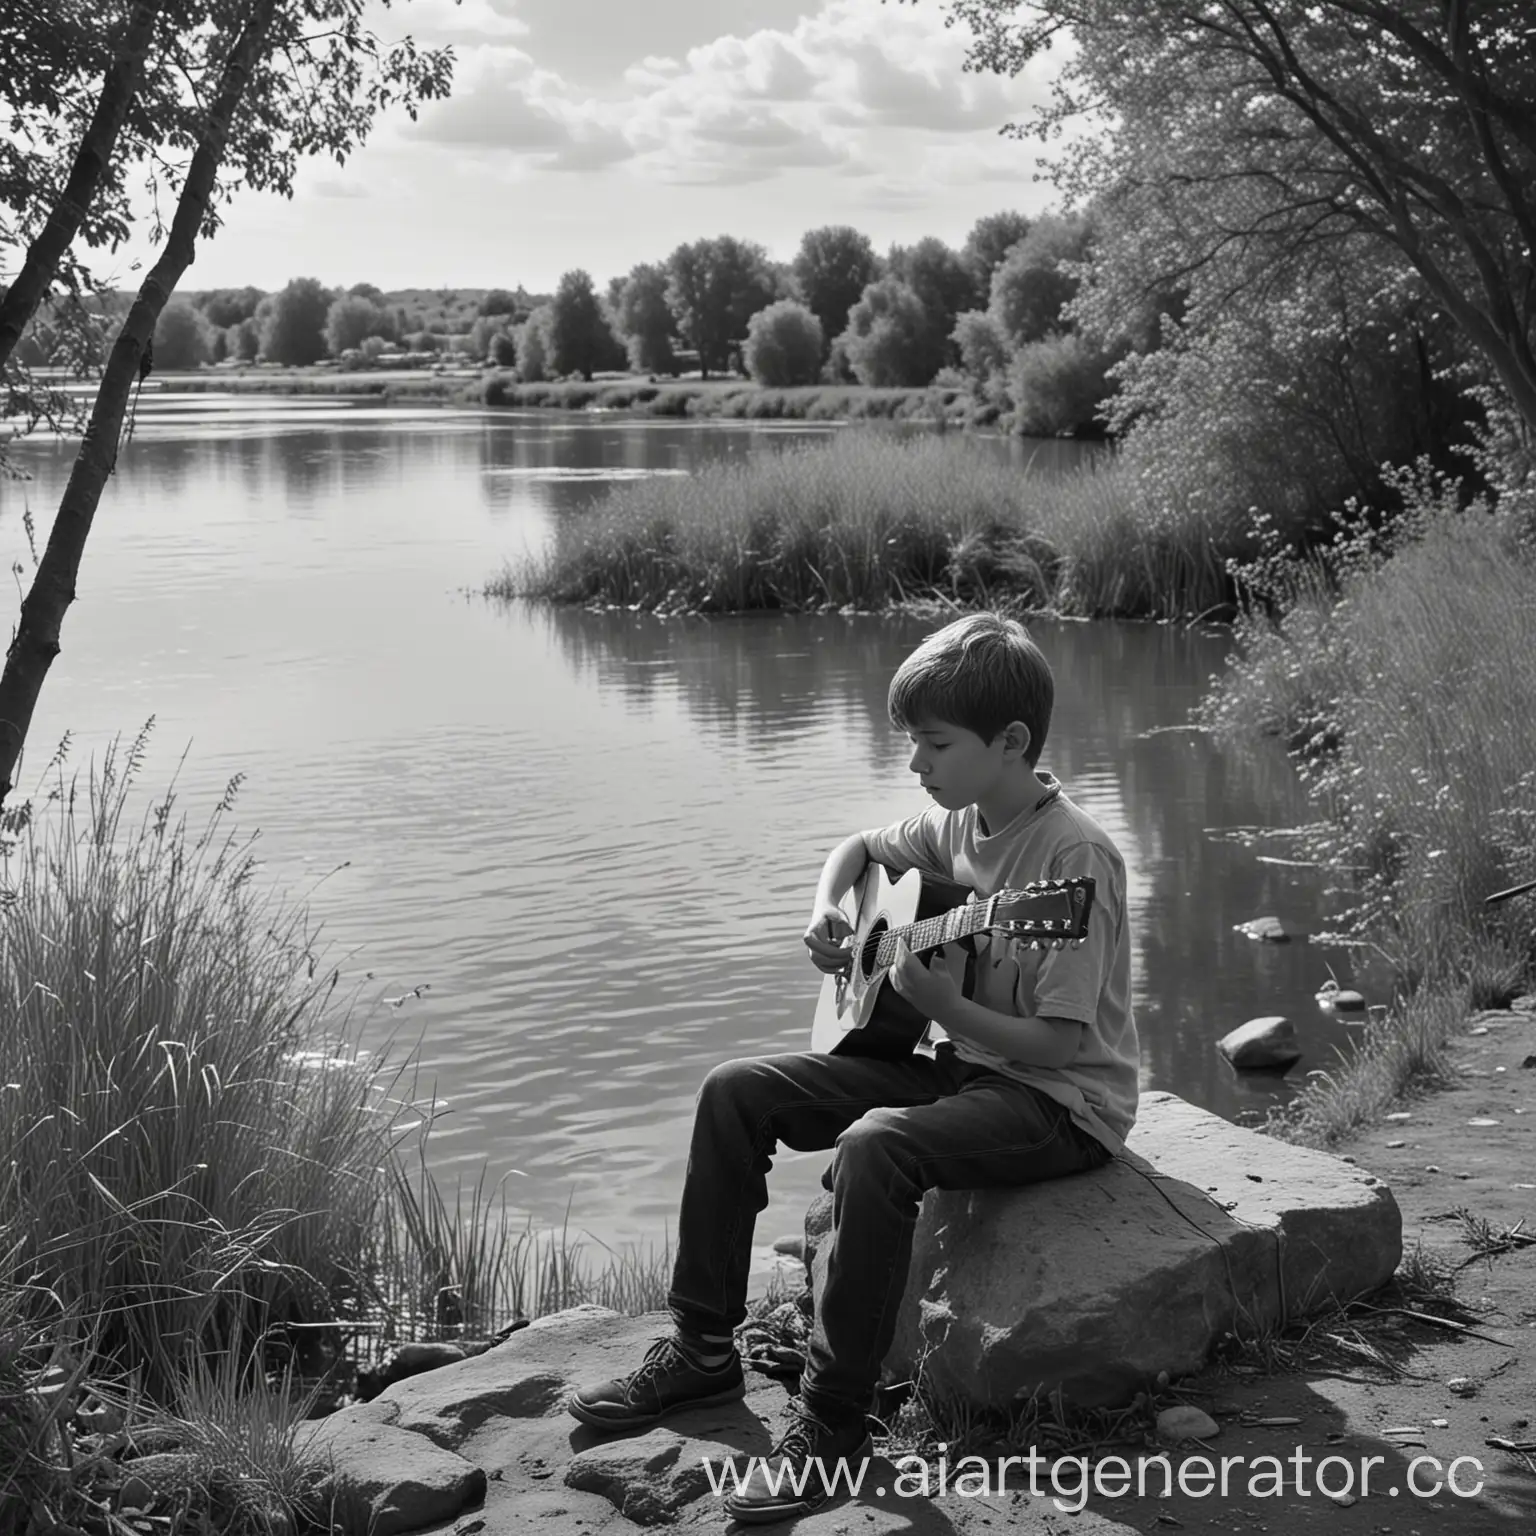 Boy-Playing-Guitar-by-the-River-in-Monochrome